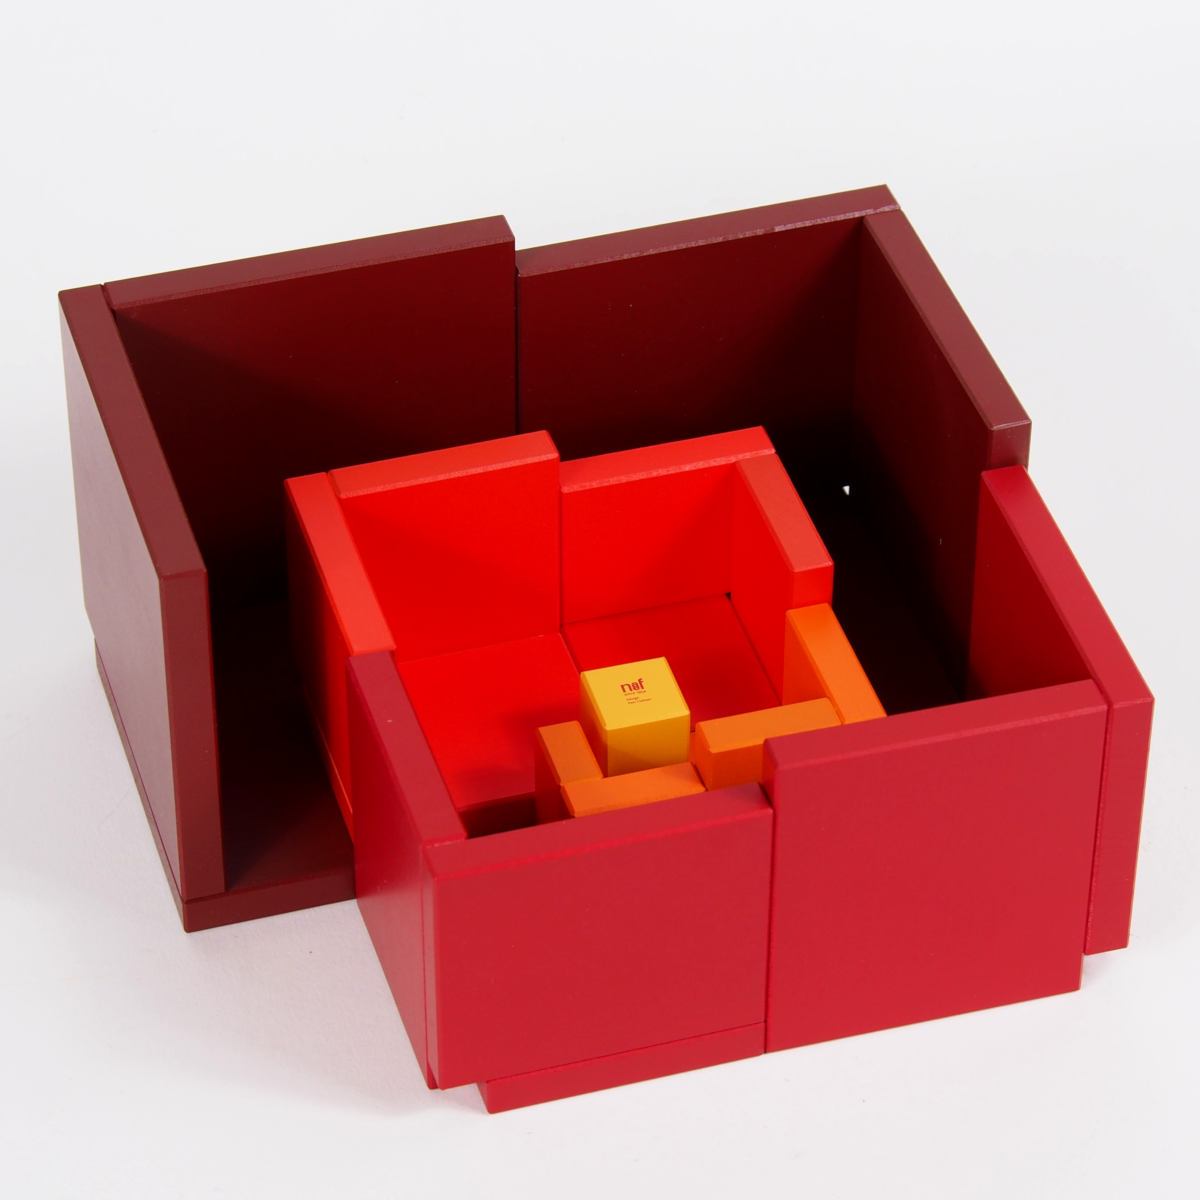 Cella (Red) – Original Construction Game by Naef, made of Wood